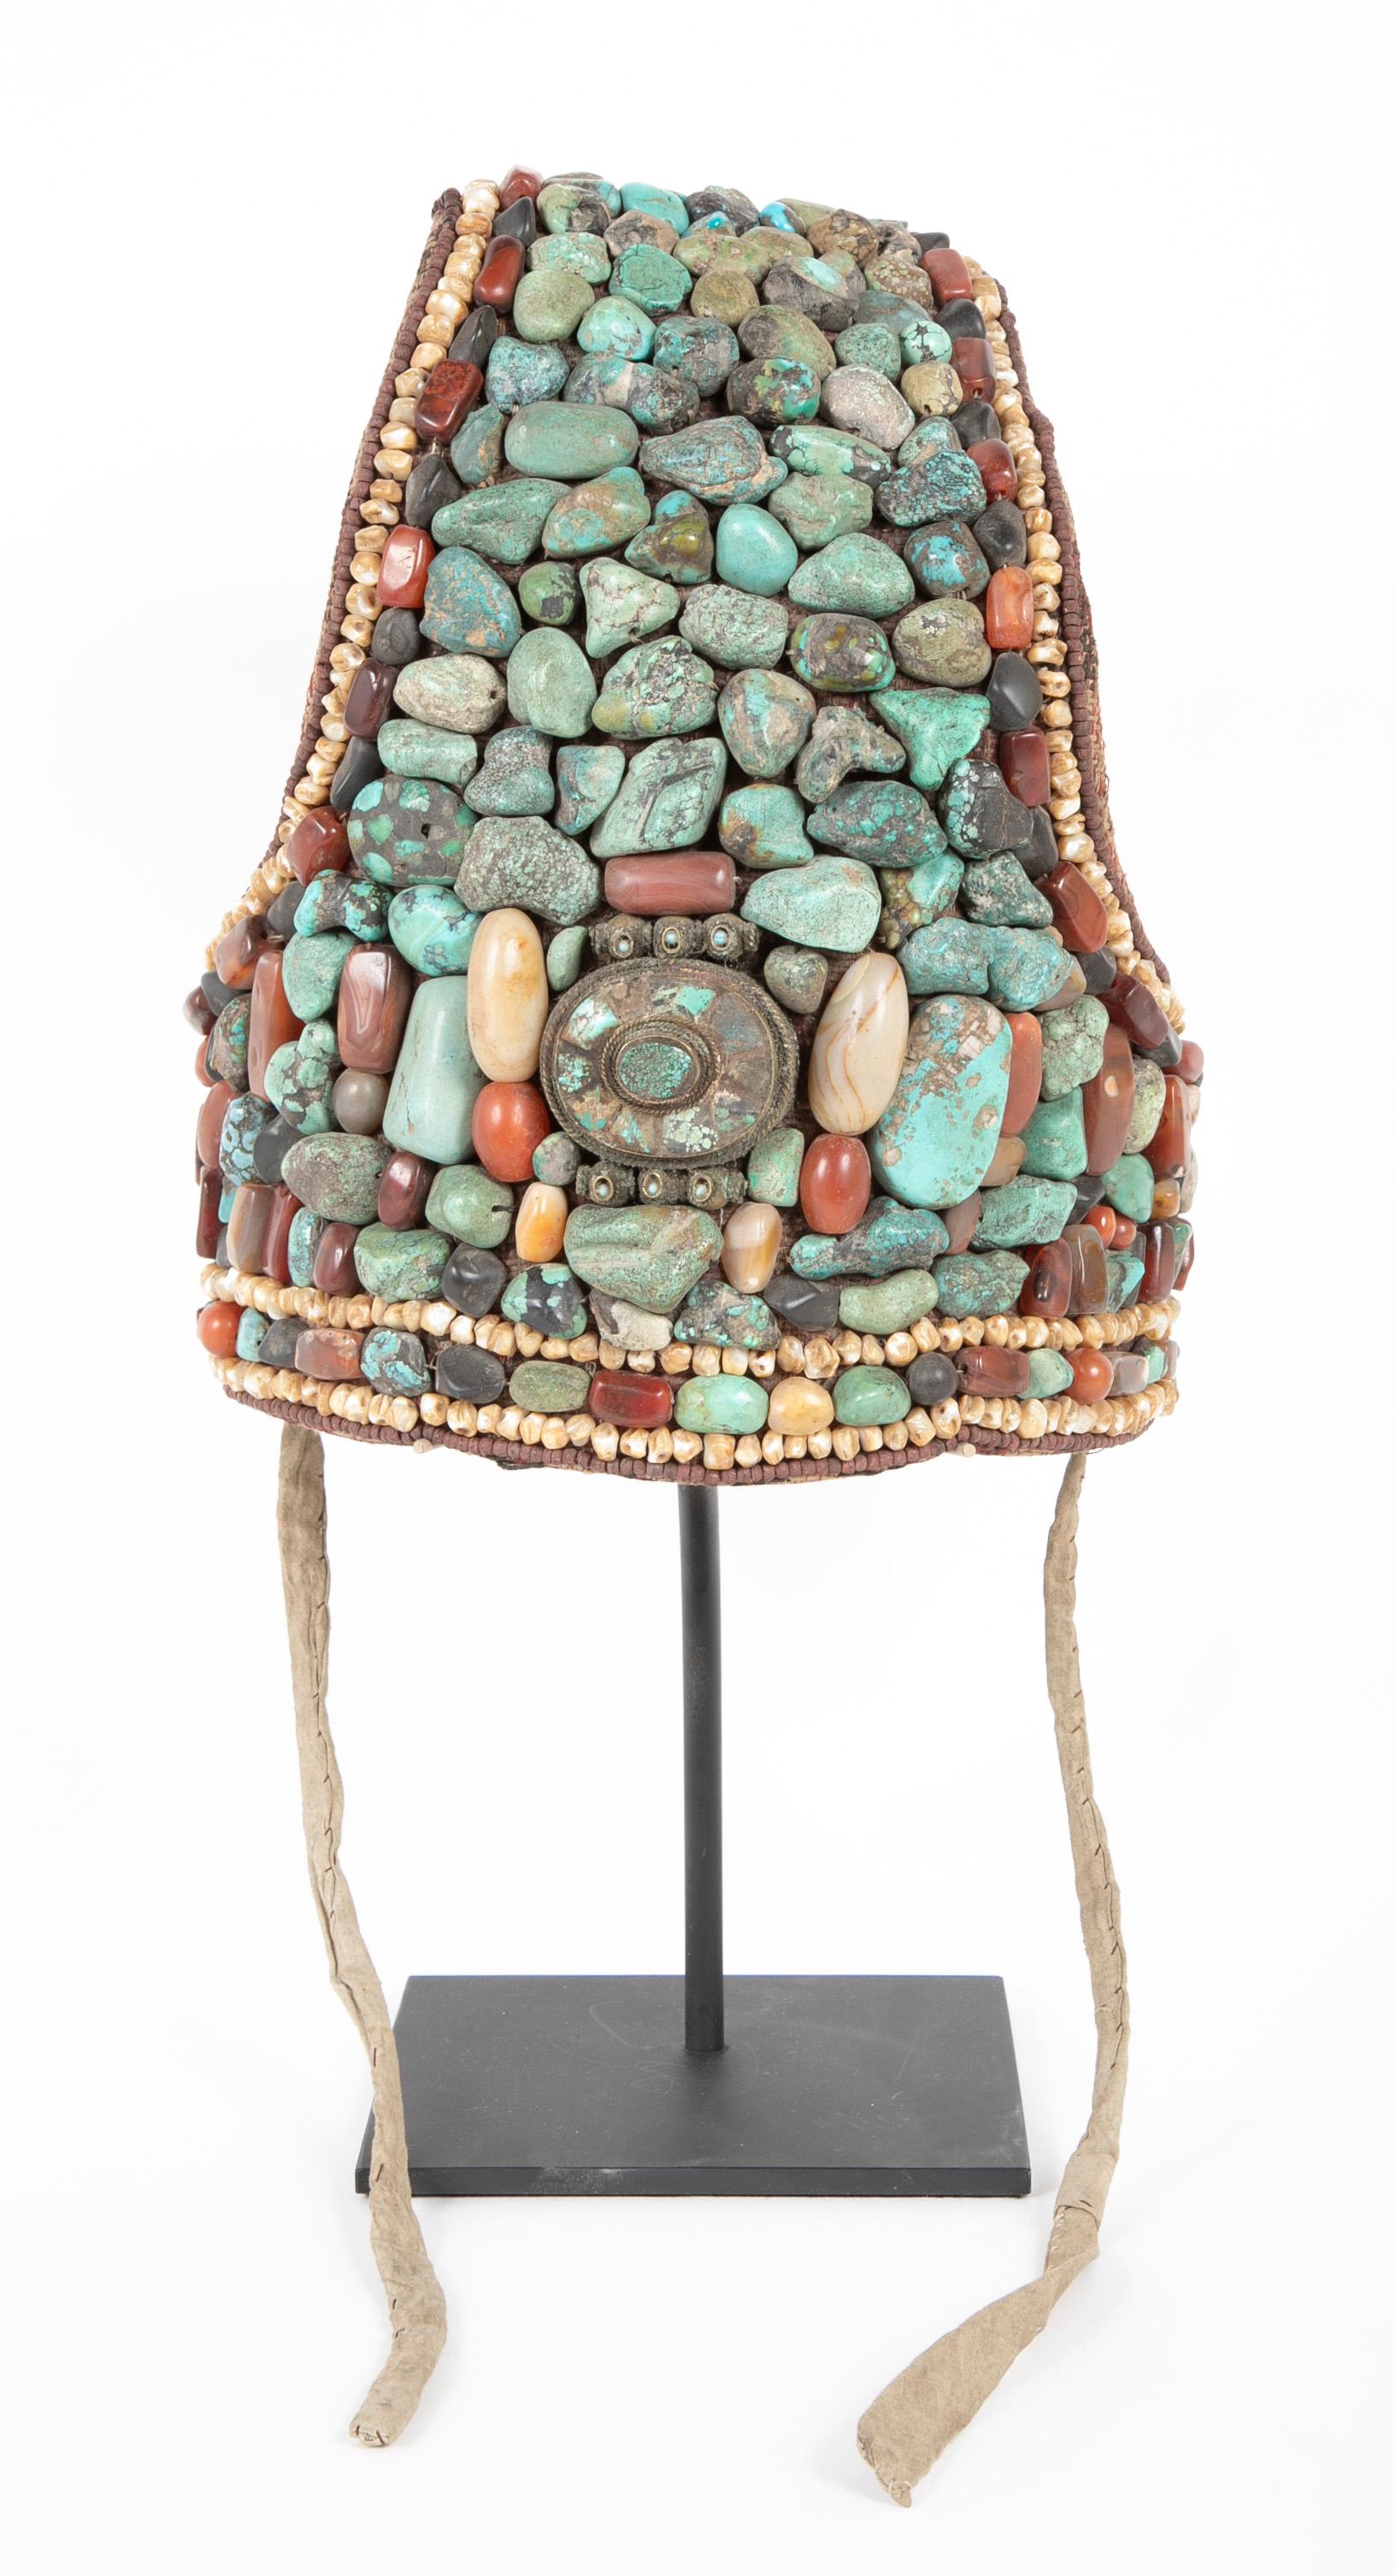 The cobra-hood shaped headdress features a central gahu box surrounded by large beads of turquoise, nacre ( mother-of-pearl ), and other semi-precious materials from Ladakh.  traditionally passed down from mother to daughter, the headdress